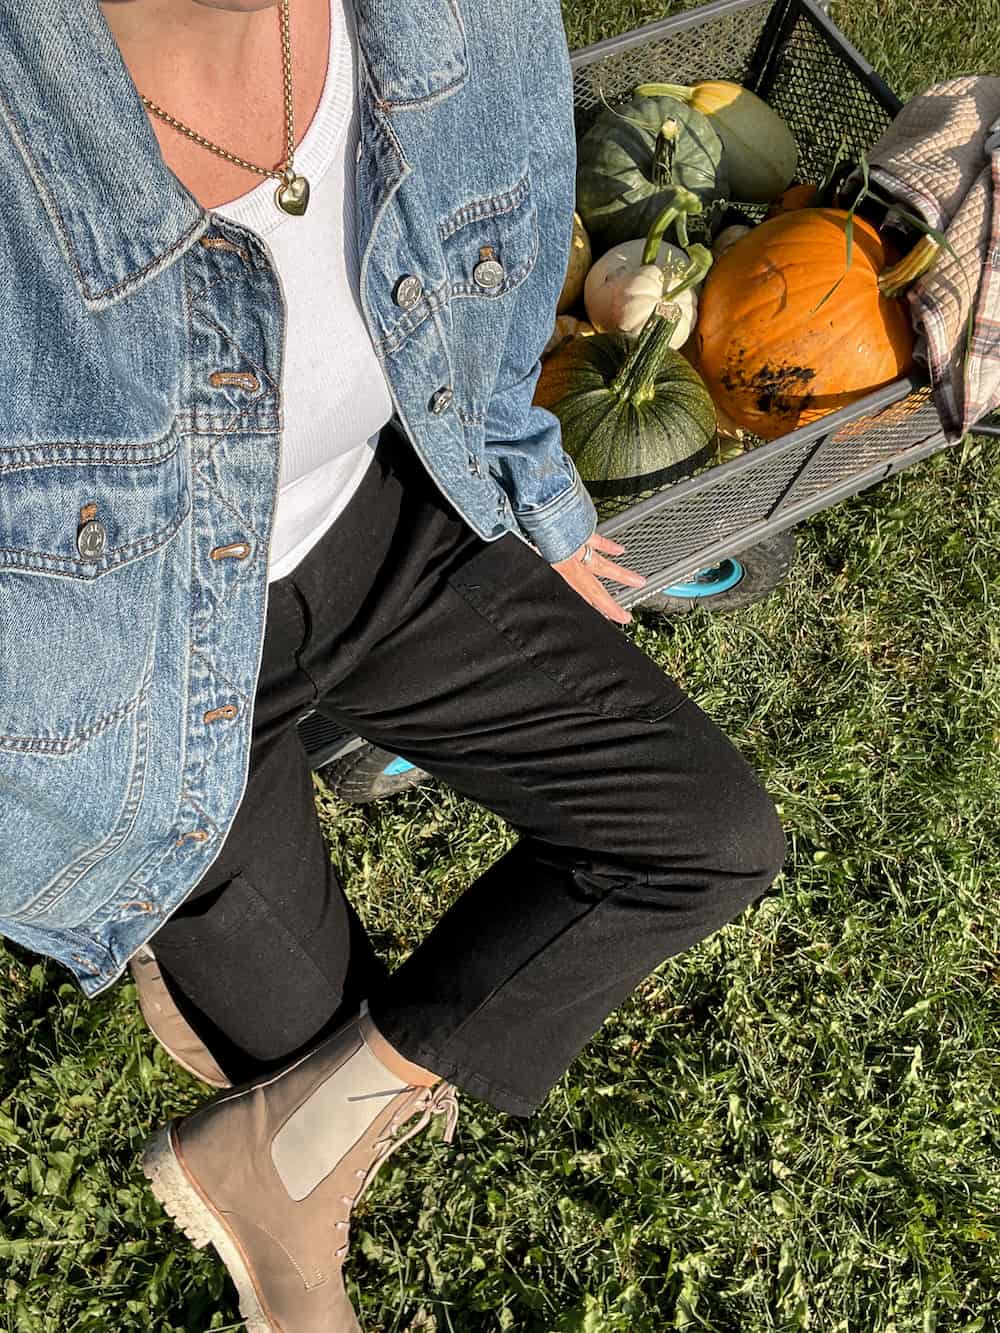 Woman wearing black jeans, tan chelsea boots, a white t-shirt and a denim jacket in a pumpkin patch.